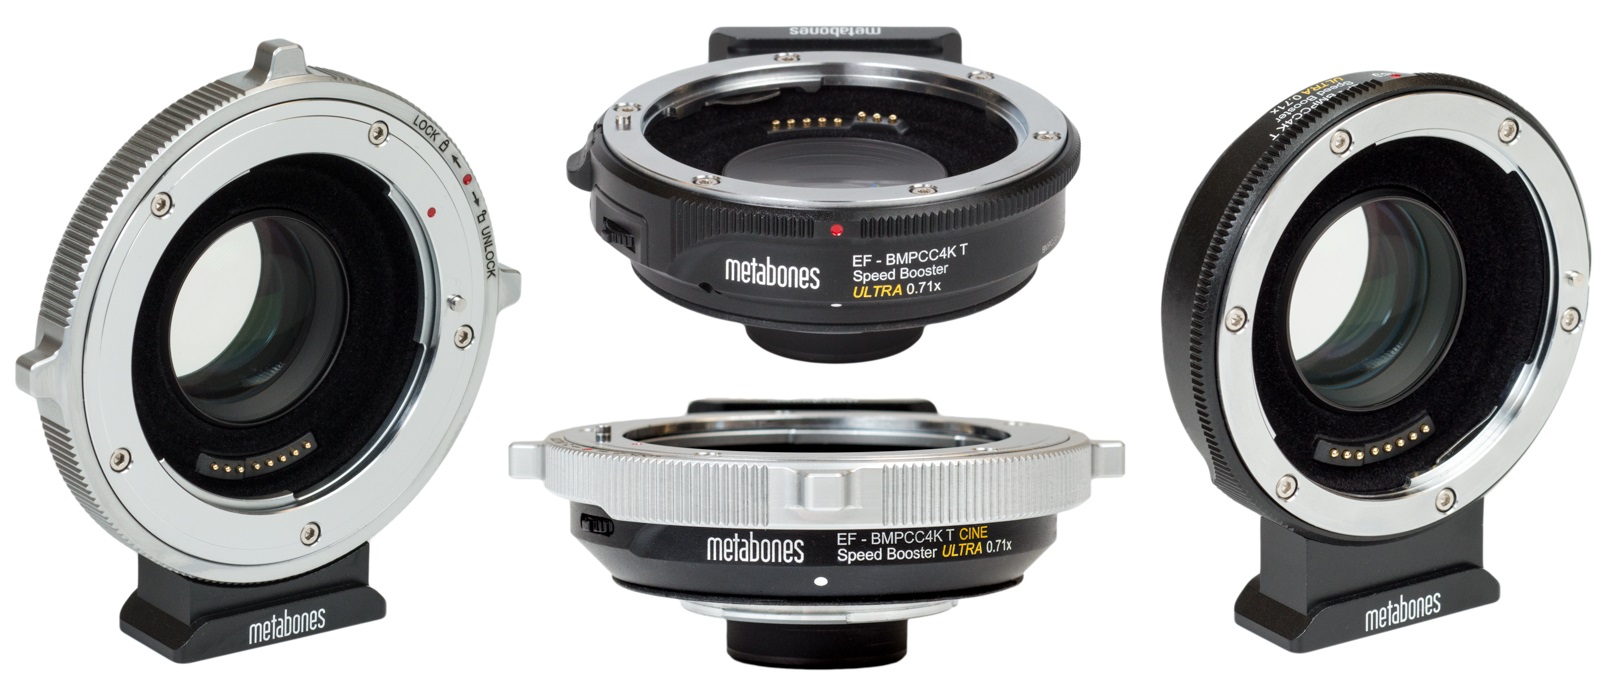 New Metabones Speed Booster Series for BMPCC 4K | CineD